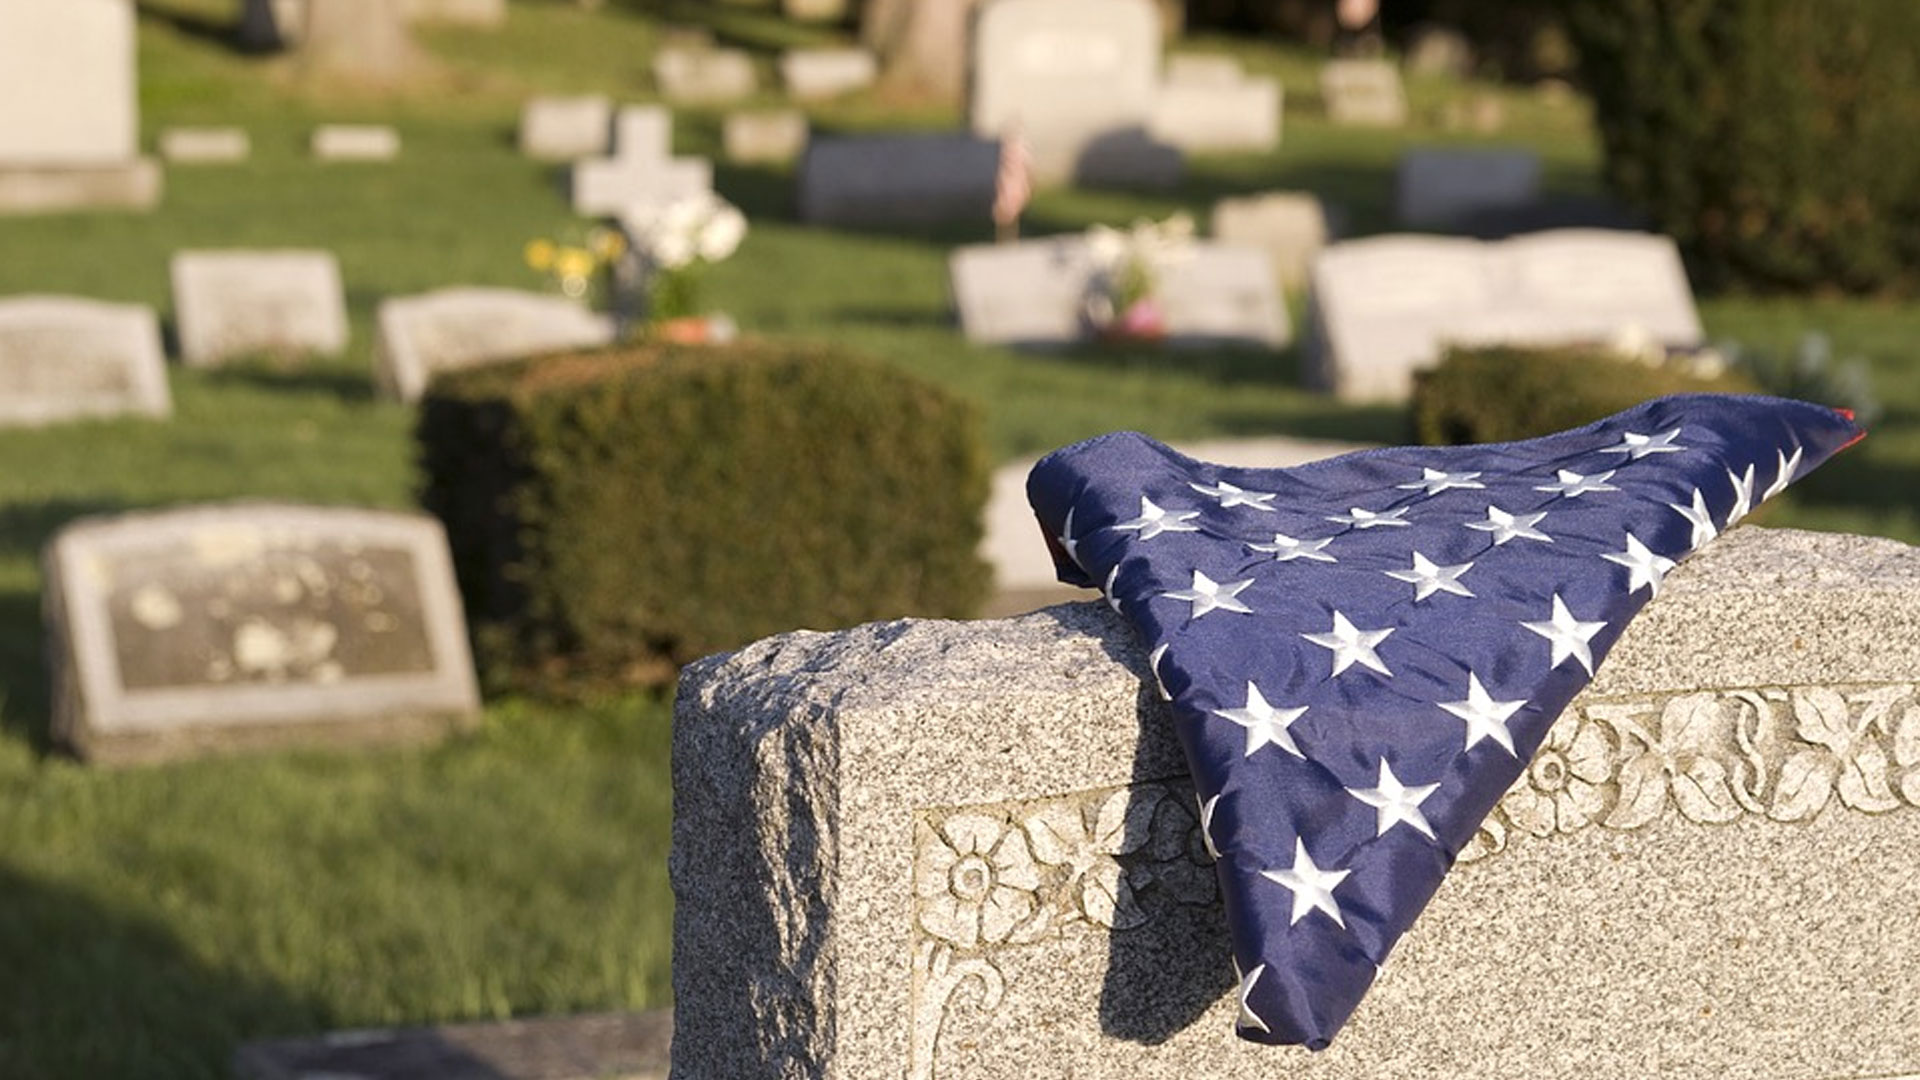 19 Years After Death, World War II Veteran and Wife Laid to Rest in New Hampshire...